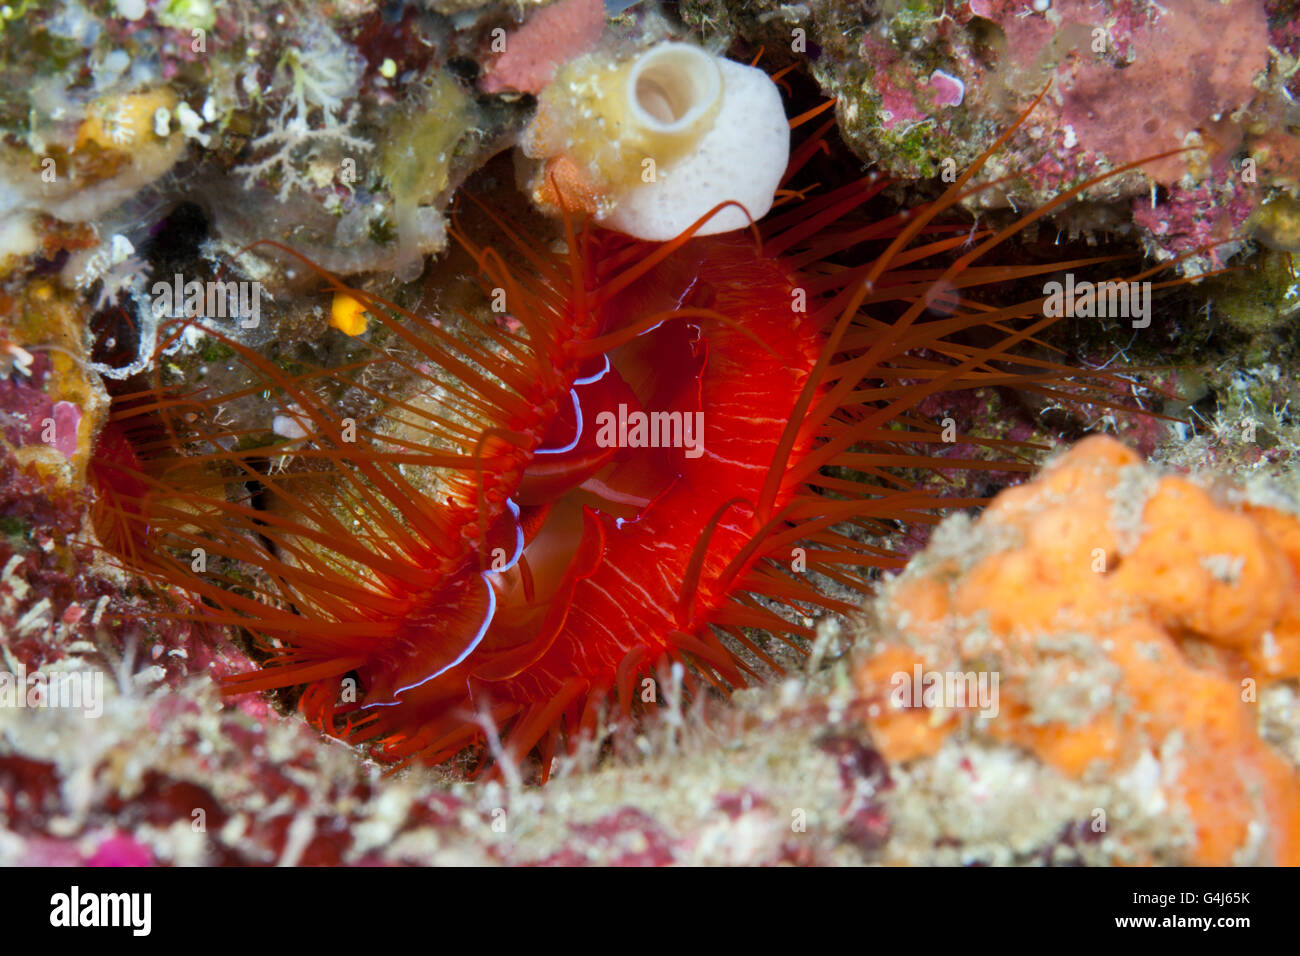 Flame scallop shell - Stock Image - C029/8380 - Science Photo Library